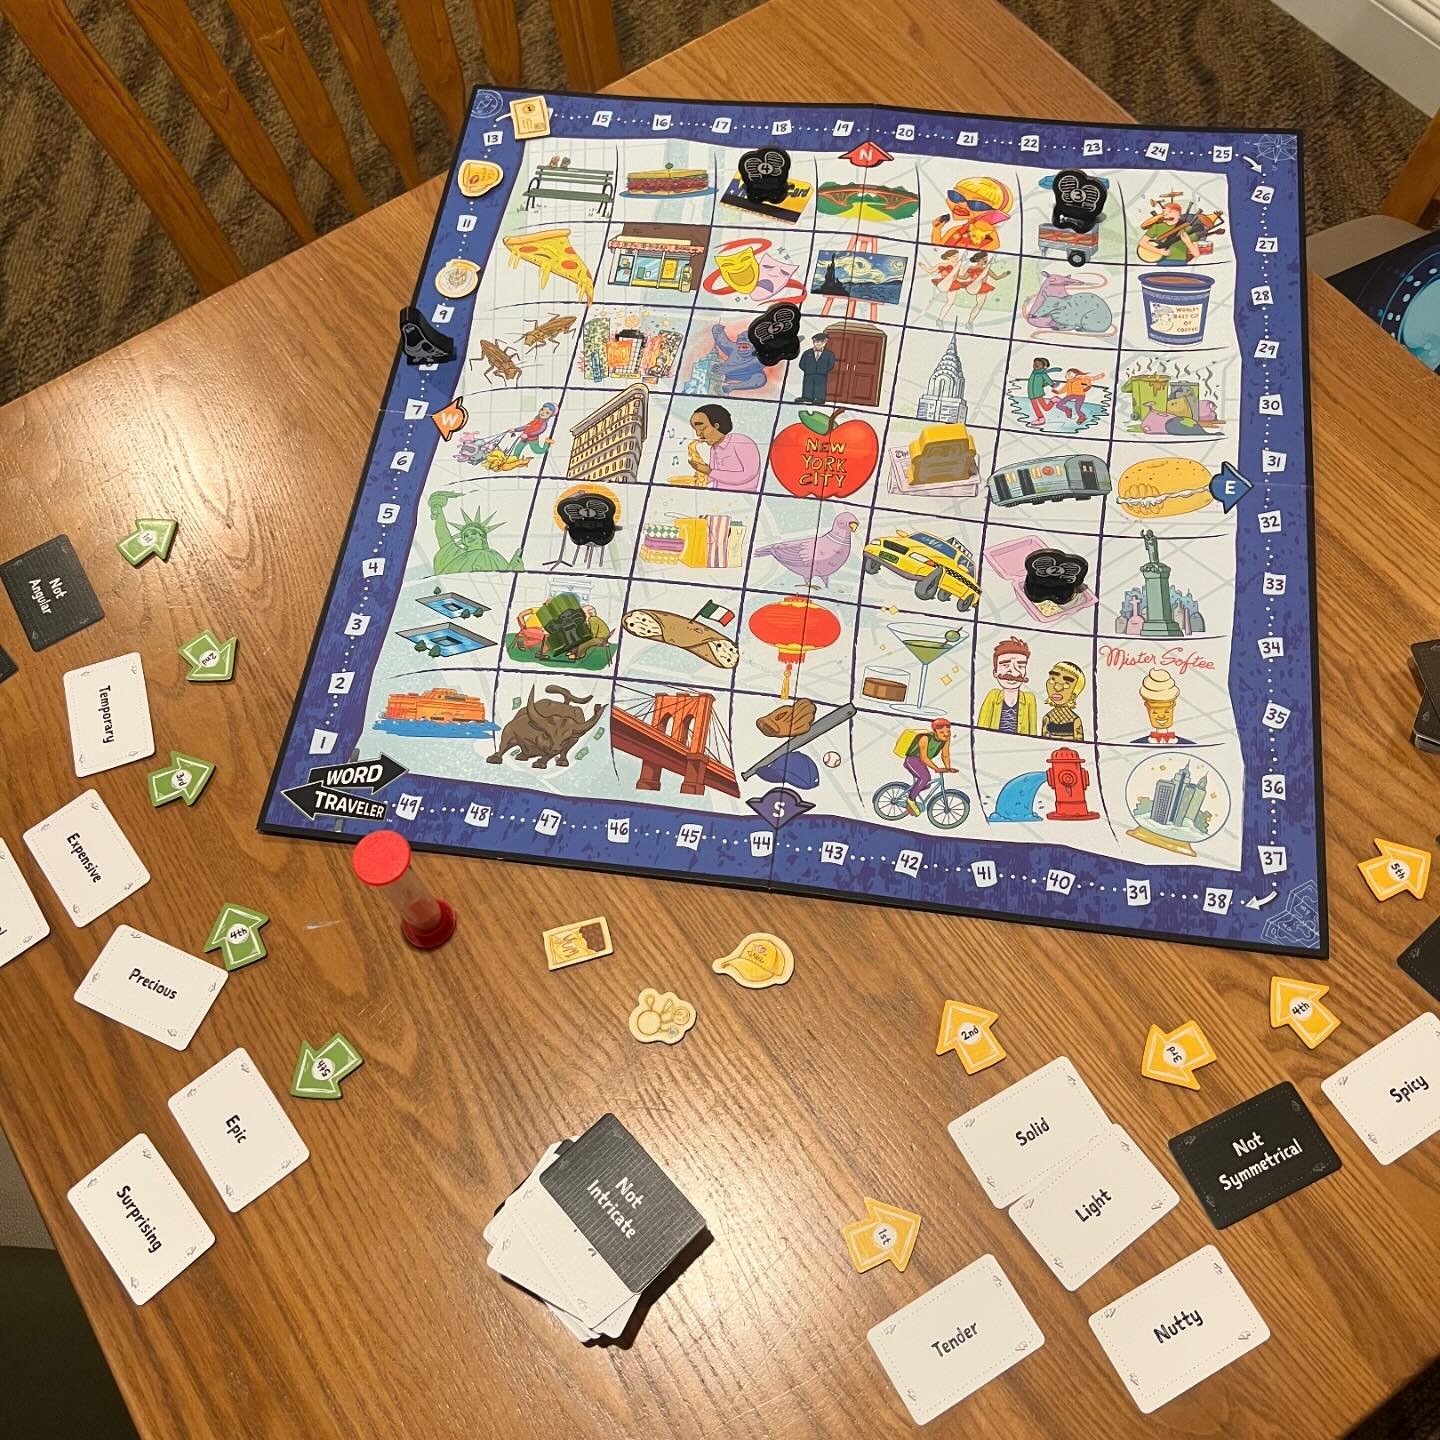 Checking out Word Traveler; a terrific family-level cooperative word game! Get directions from other players using only the words on cards in front of you! Really clever and fun!

#mainstboardgamecafe #flgs #Unplugyourgame #screenfreekids #familyfun 